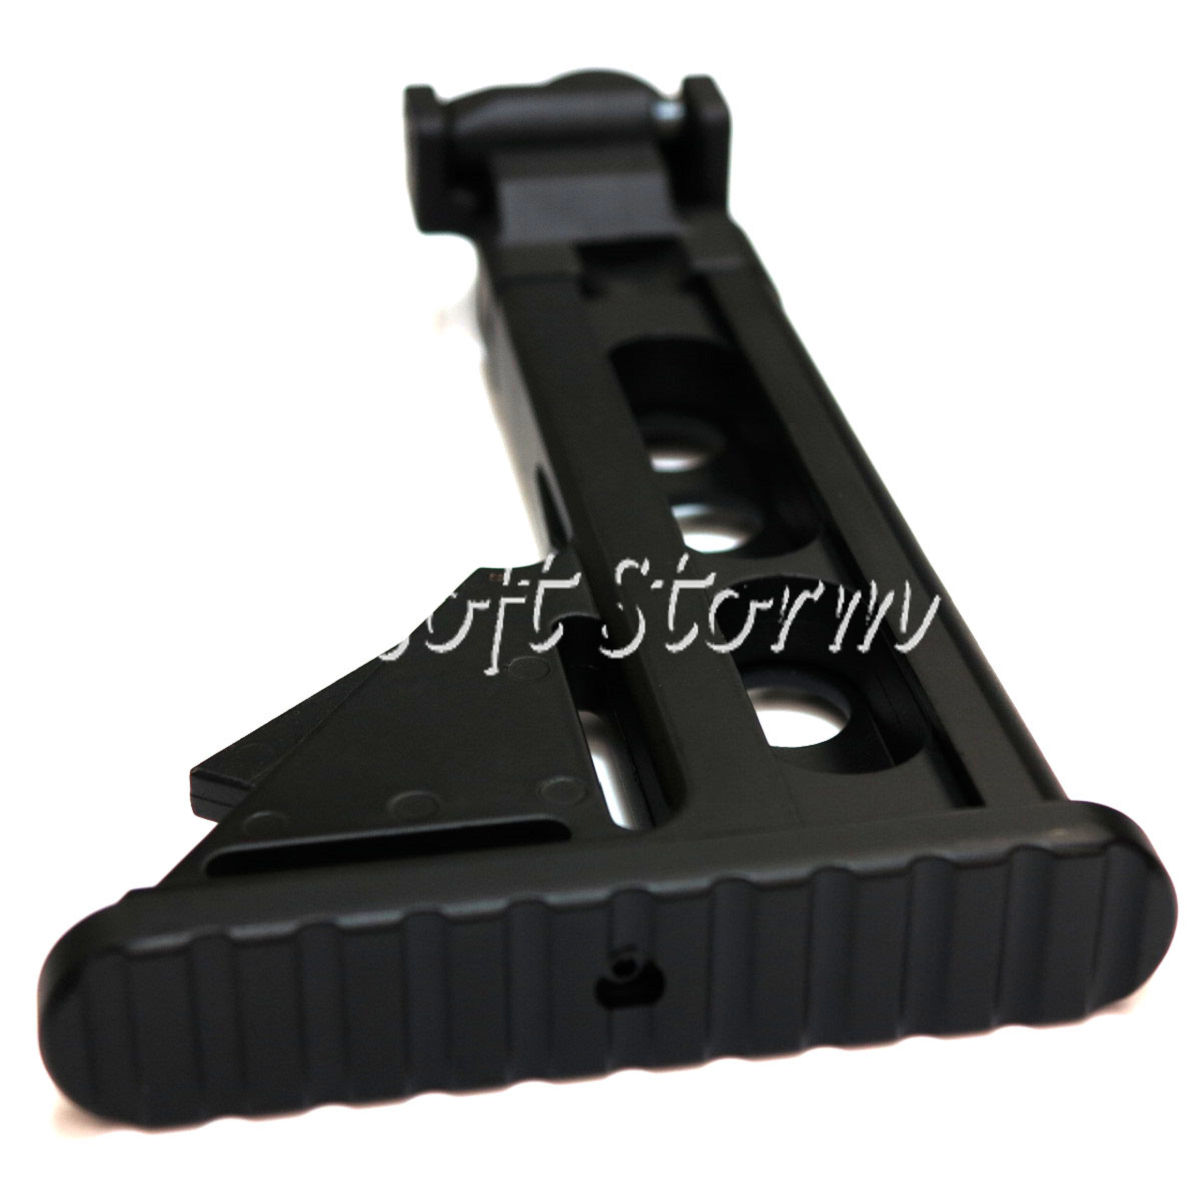 Airsoft Tactical Gear D-Boys LR-300 Metal Extendable Folding Stock for M4/M16 Black